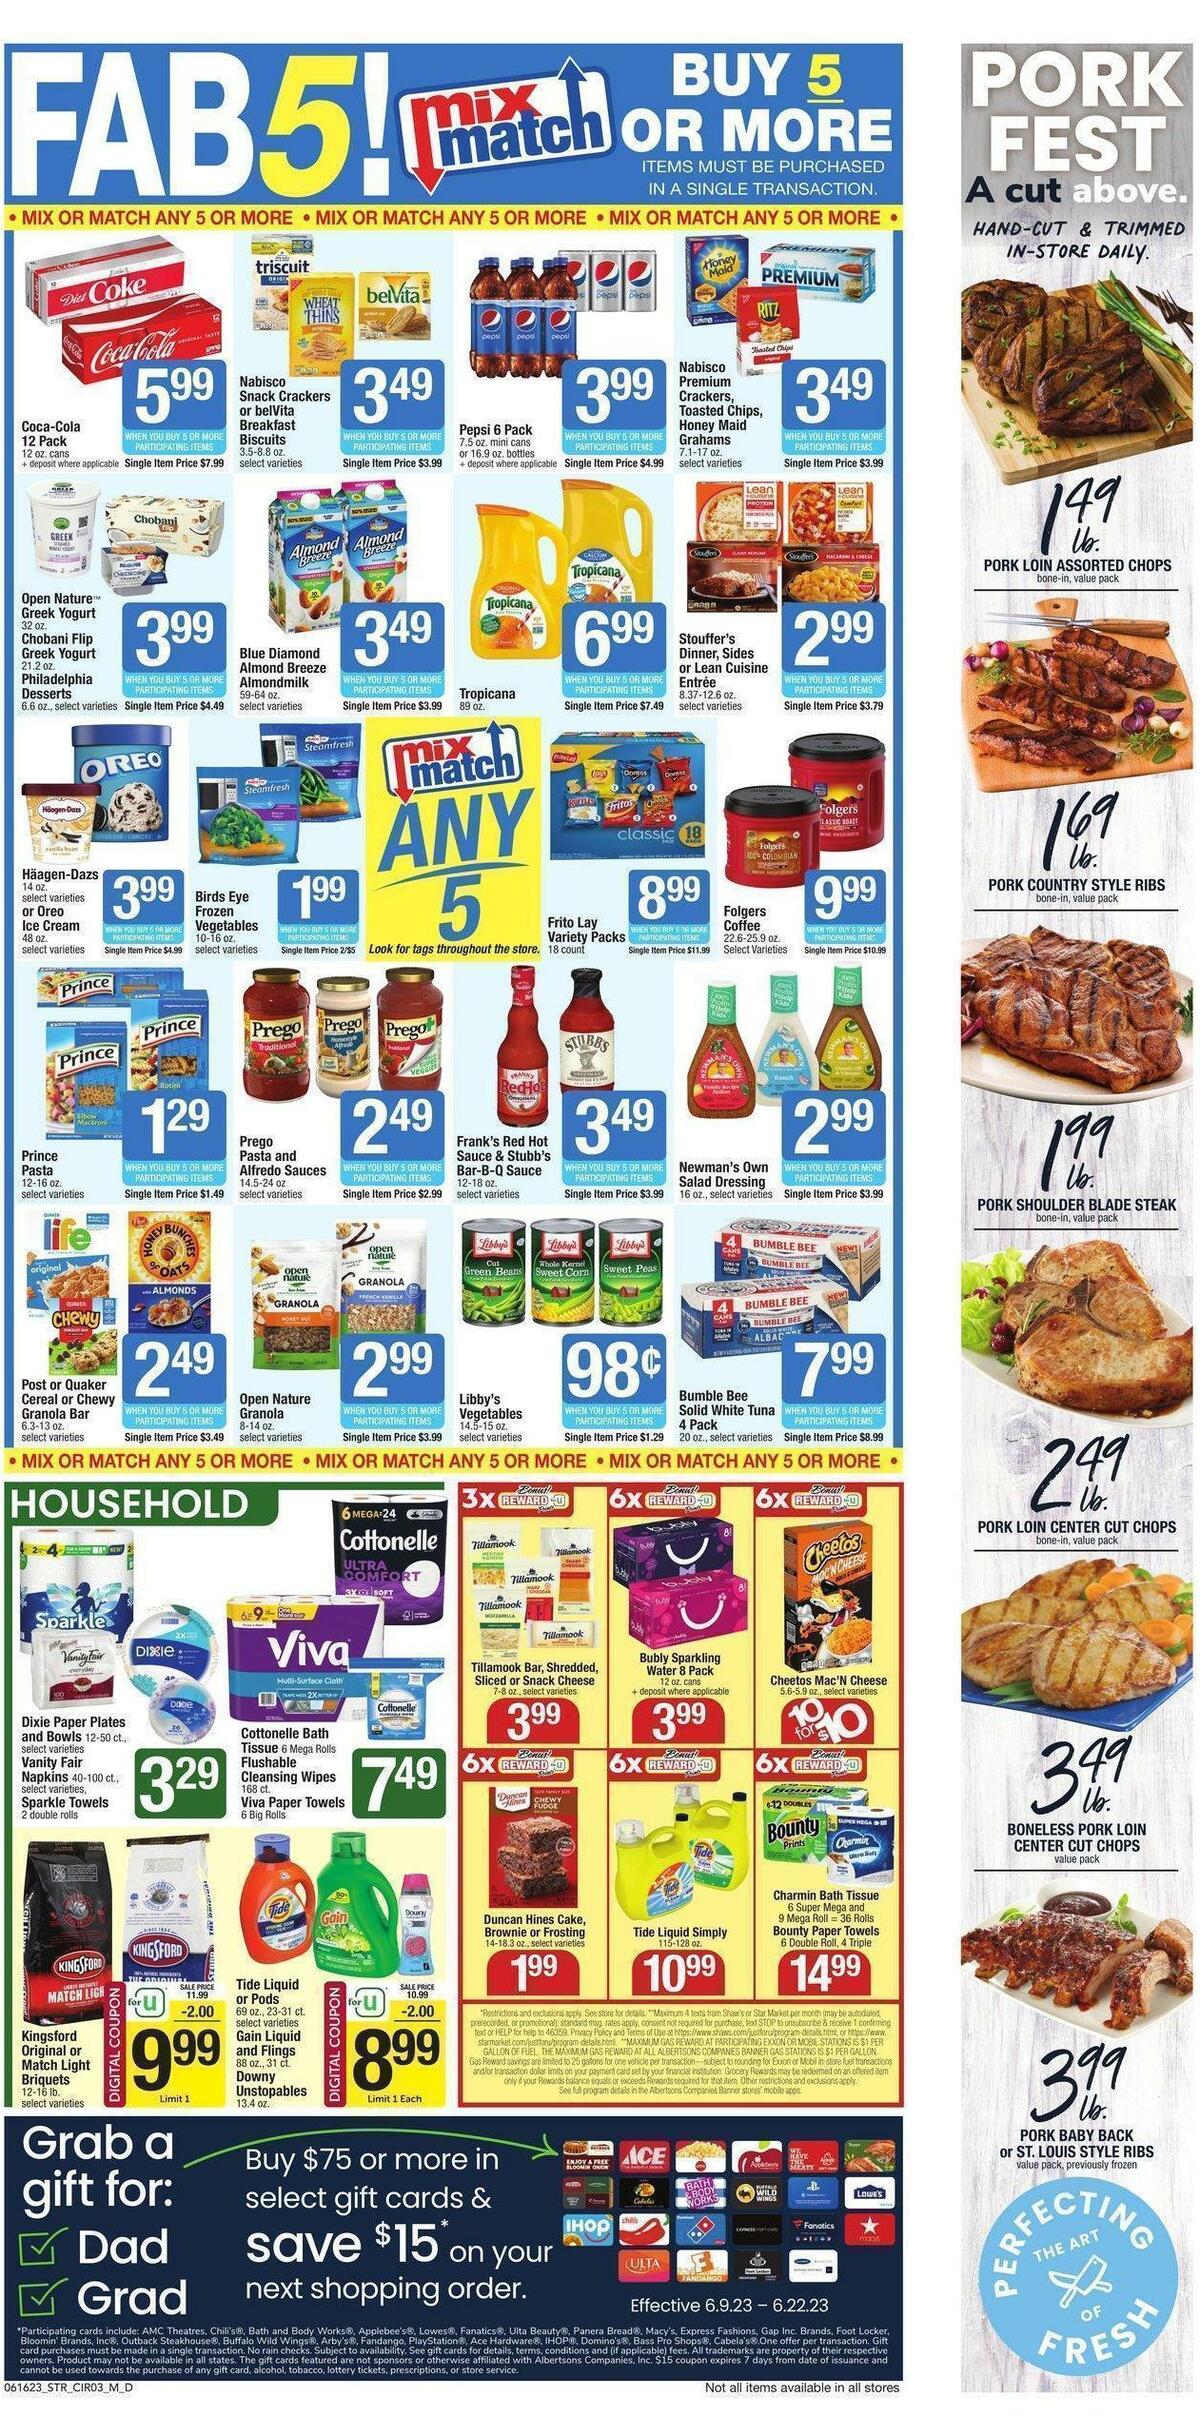 Star Market Weekly Ad from June 16